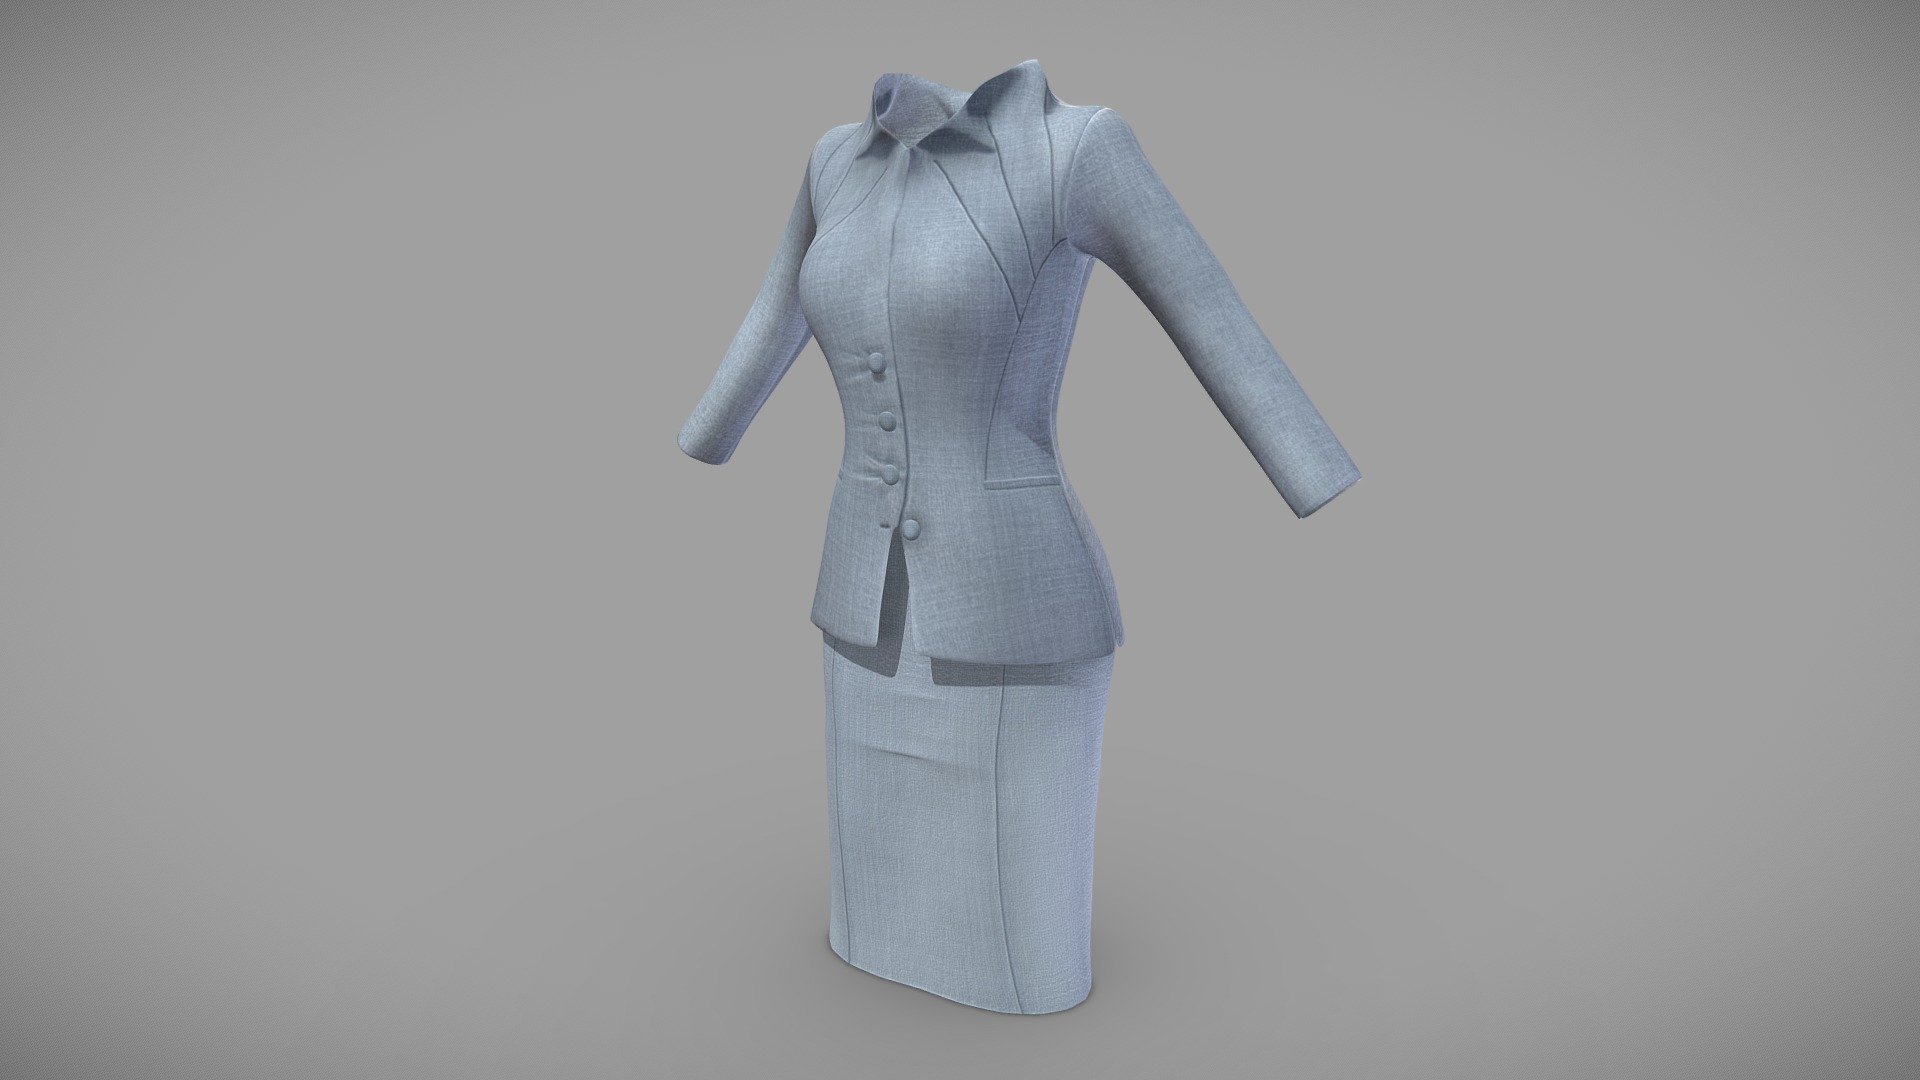 Jacket + Skirt

Can fit to any character

Ready for games

Clean topology

No overlapping unwrapped UVs

High quality realistic textues

FBX, OBJ, gITF, USDZ (request other formats)

PBR or Classic

Please ask for any other questions

Type     user:3dia &ldquo;search term